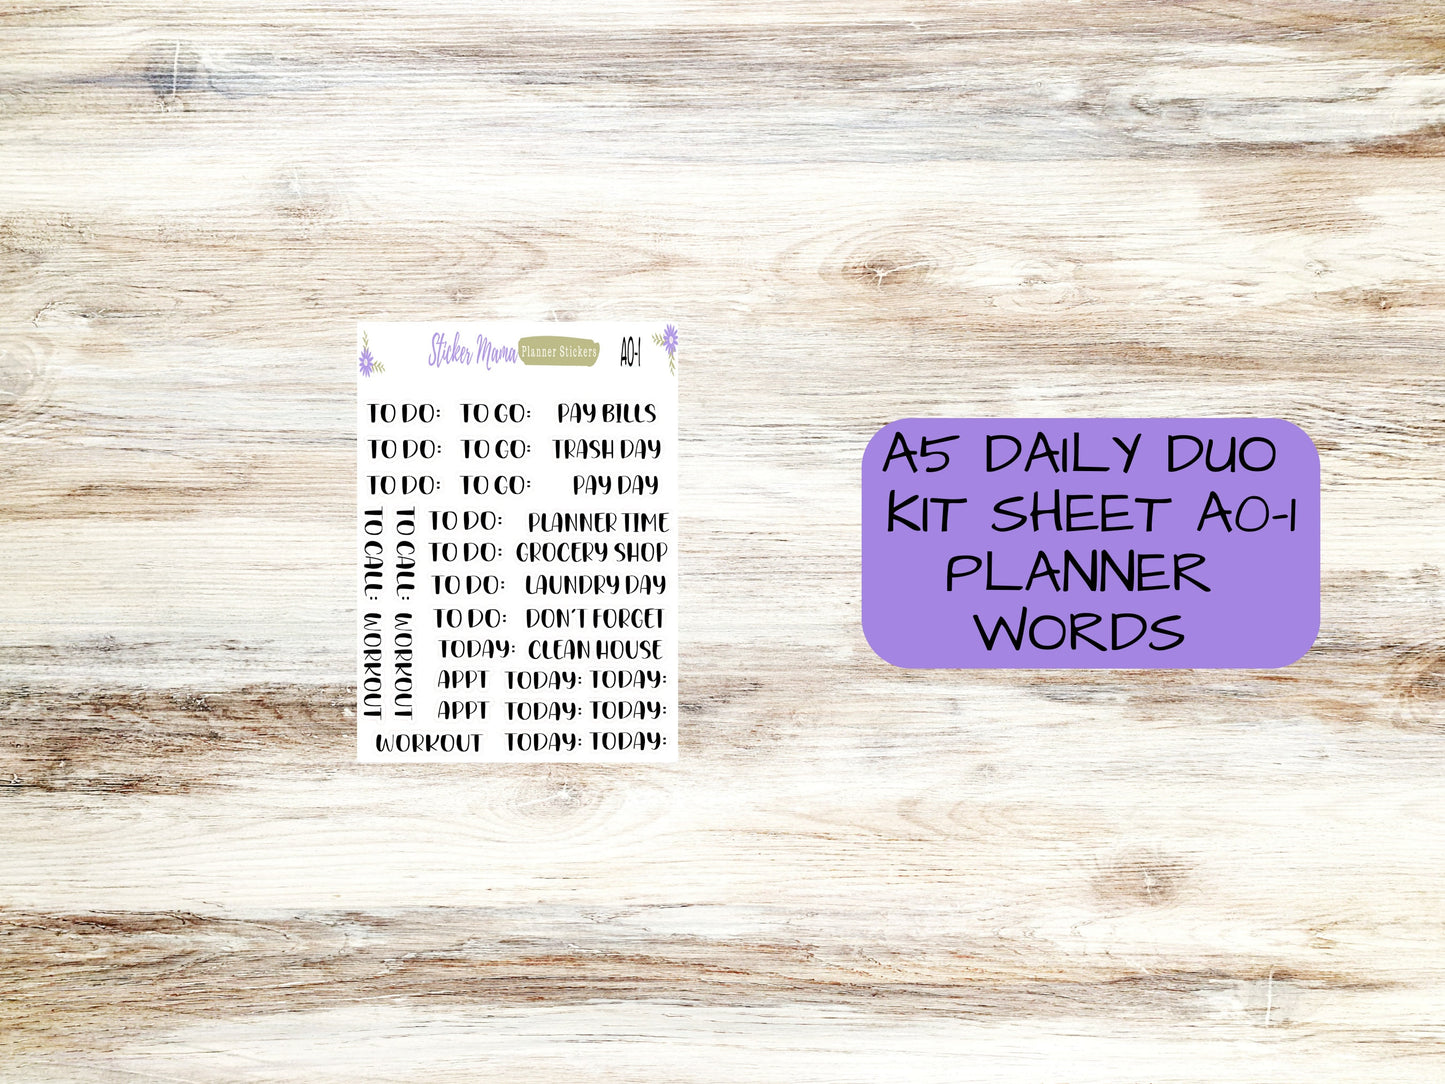 A5-DAILY DUO-Kit #3106 || Hello, Plaid!  || Planner Stickers - Daily Duo A5 Planner - Daily Duo Stickers - Daily Planner